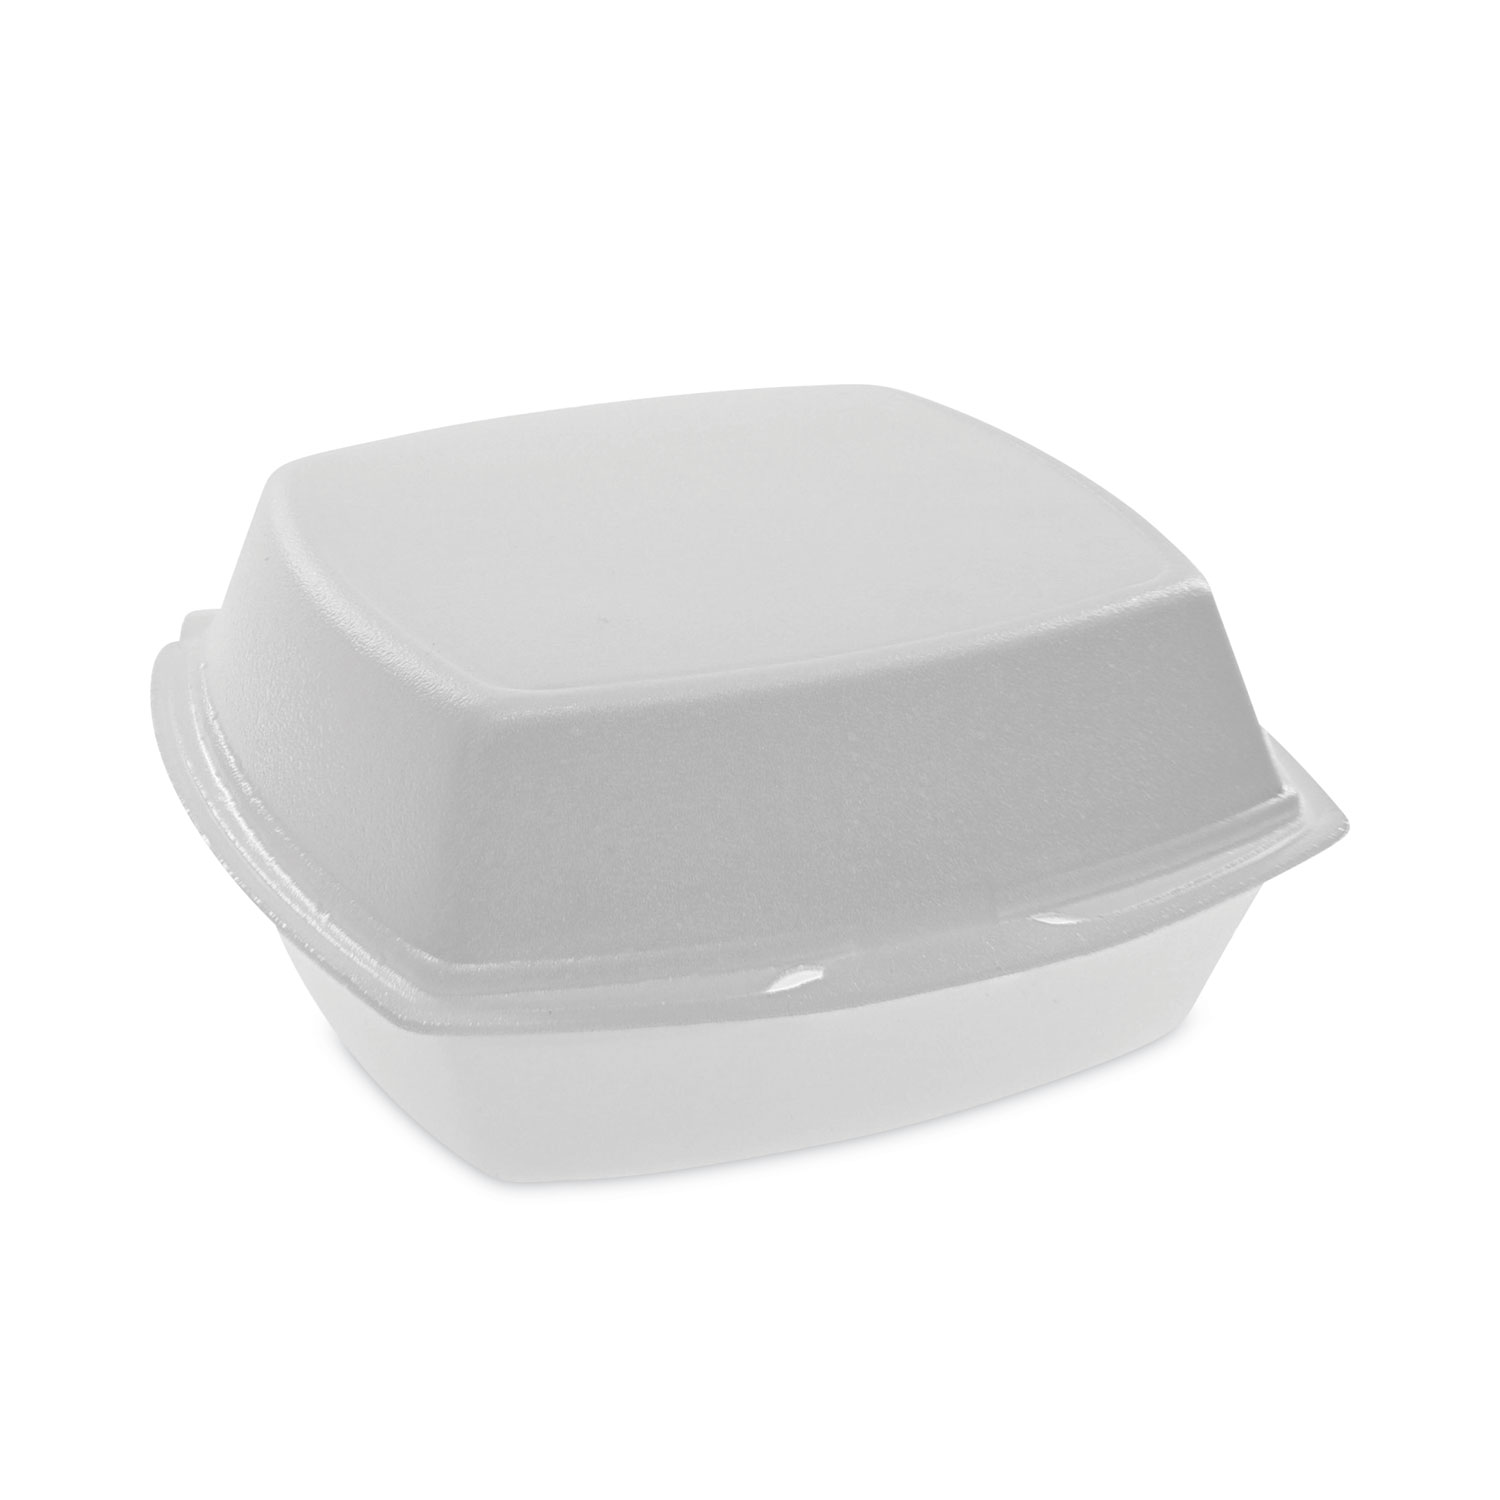 Pactiv Foam Hinged Lid Containers, Single Tab Lock #205 Utility, 9.19 x 6.5 x 2.75, White, 150/Carton